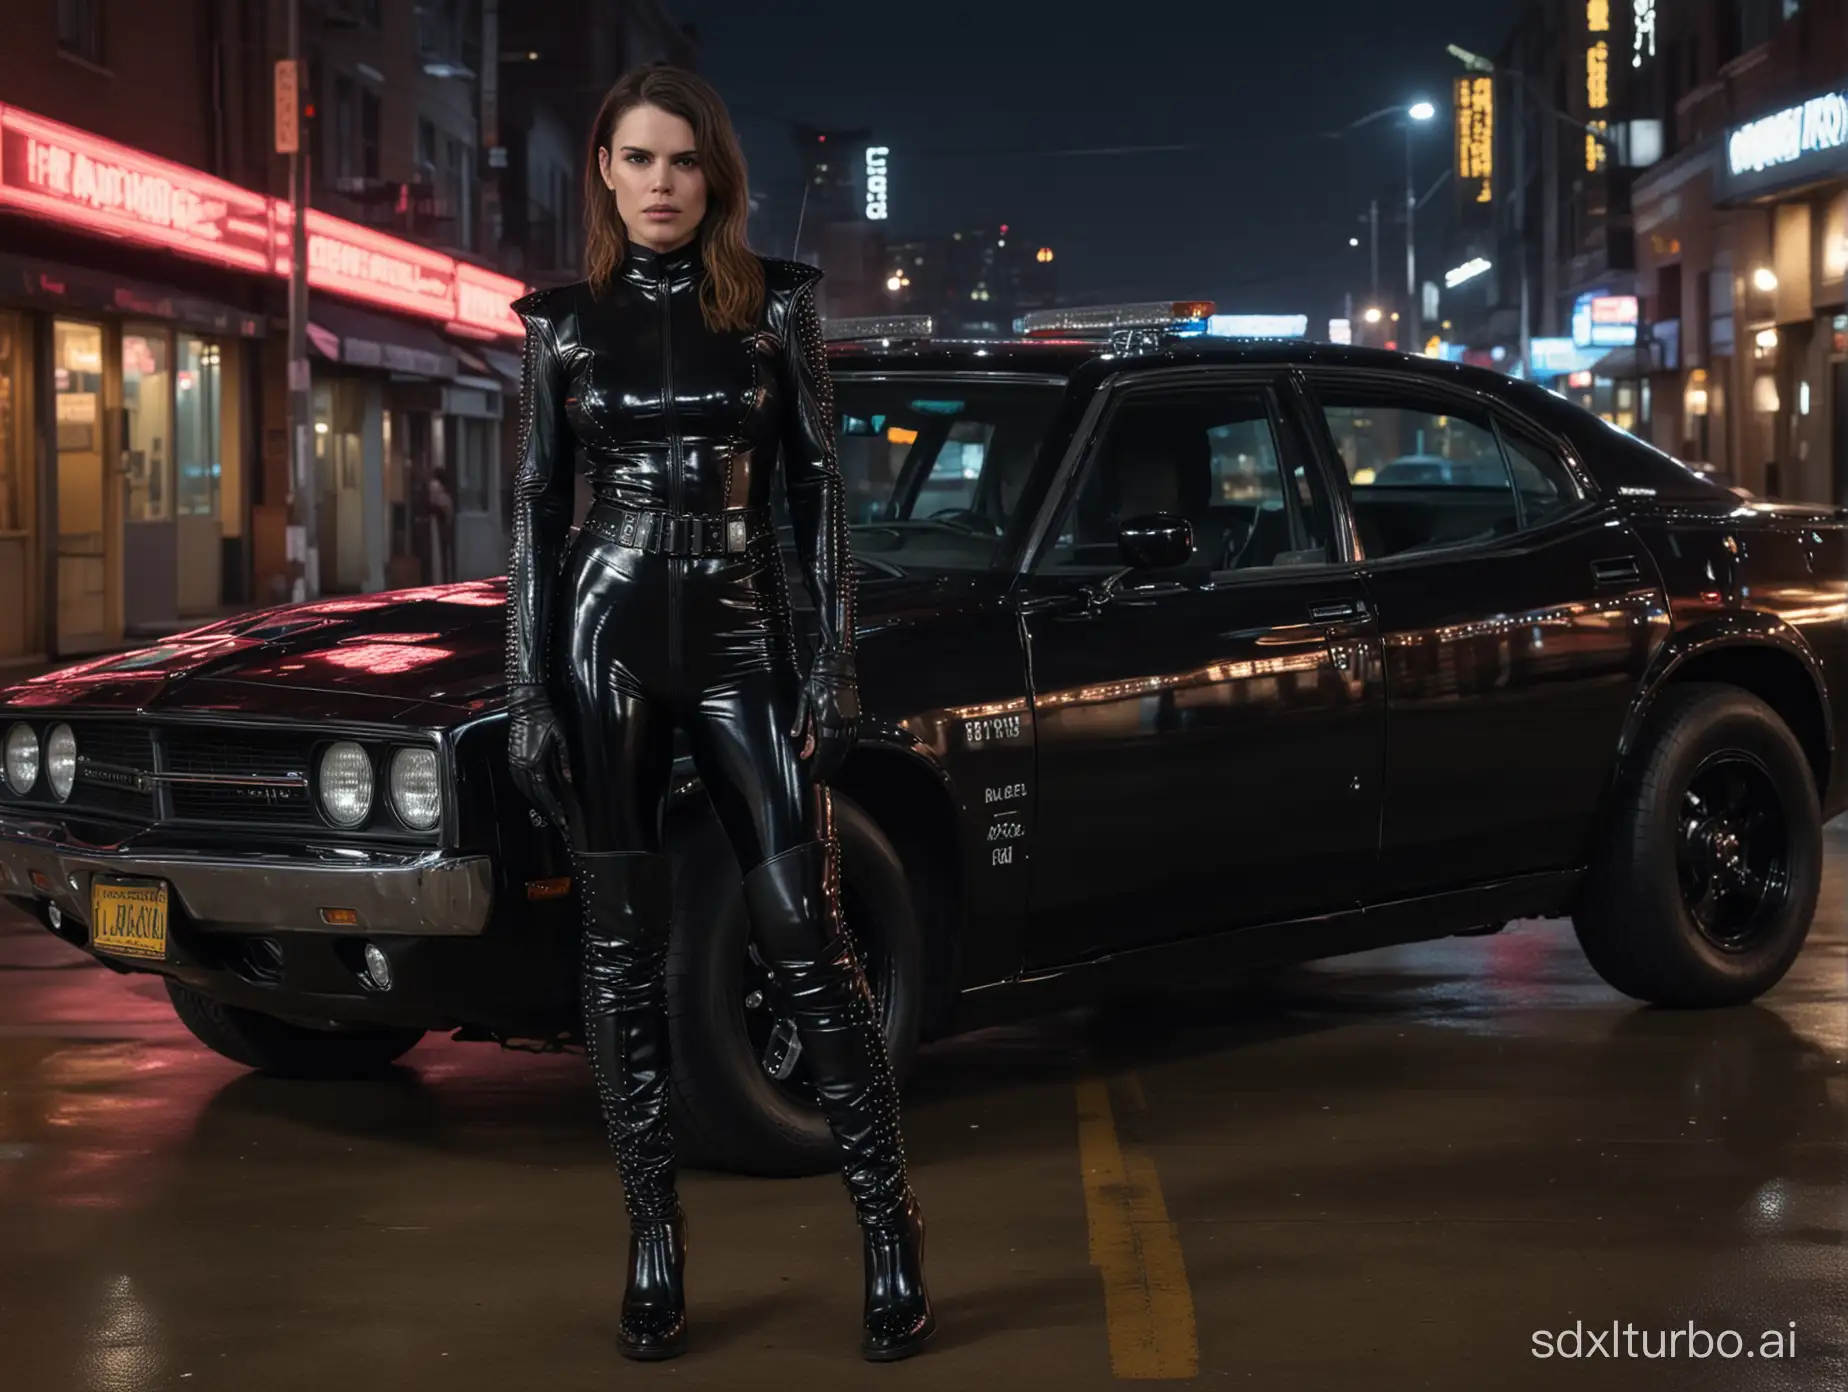 detailled hd photo, full-length framing, cyberpunk police woman Clea Duvall standing, wearing black low-cut shiny pvc catsuit, wearing long shiny pvc gloves, wearing shiny pvc thigh high boots, spikes and studs, in cyberpunk city at night with dodge charger police car, illuminated by neon